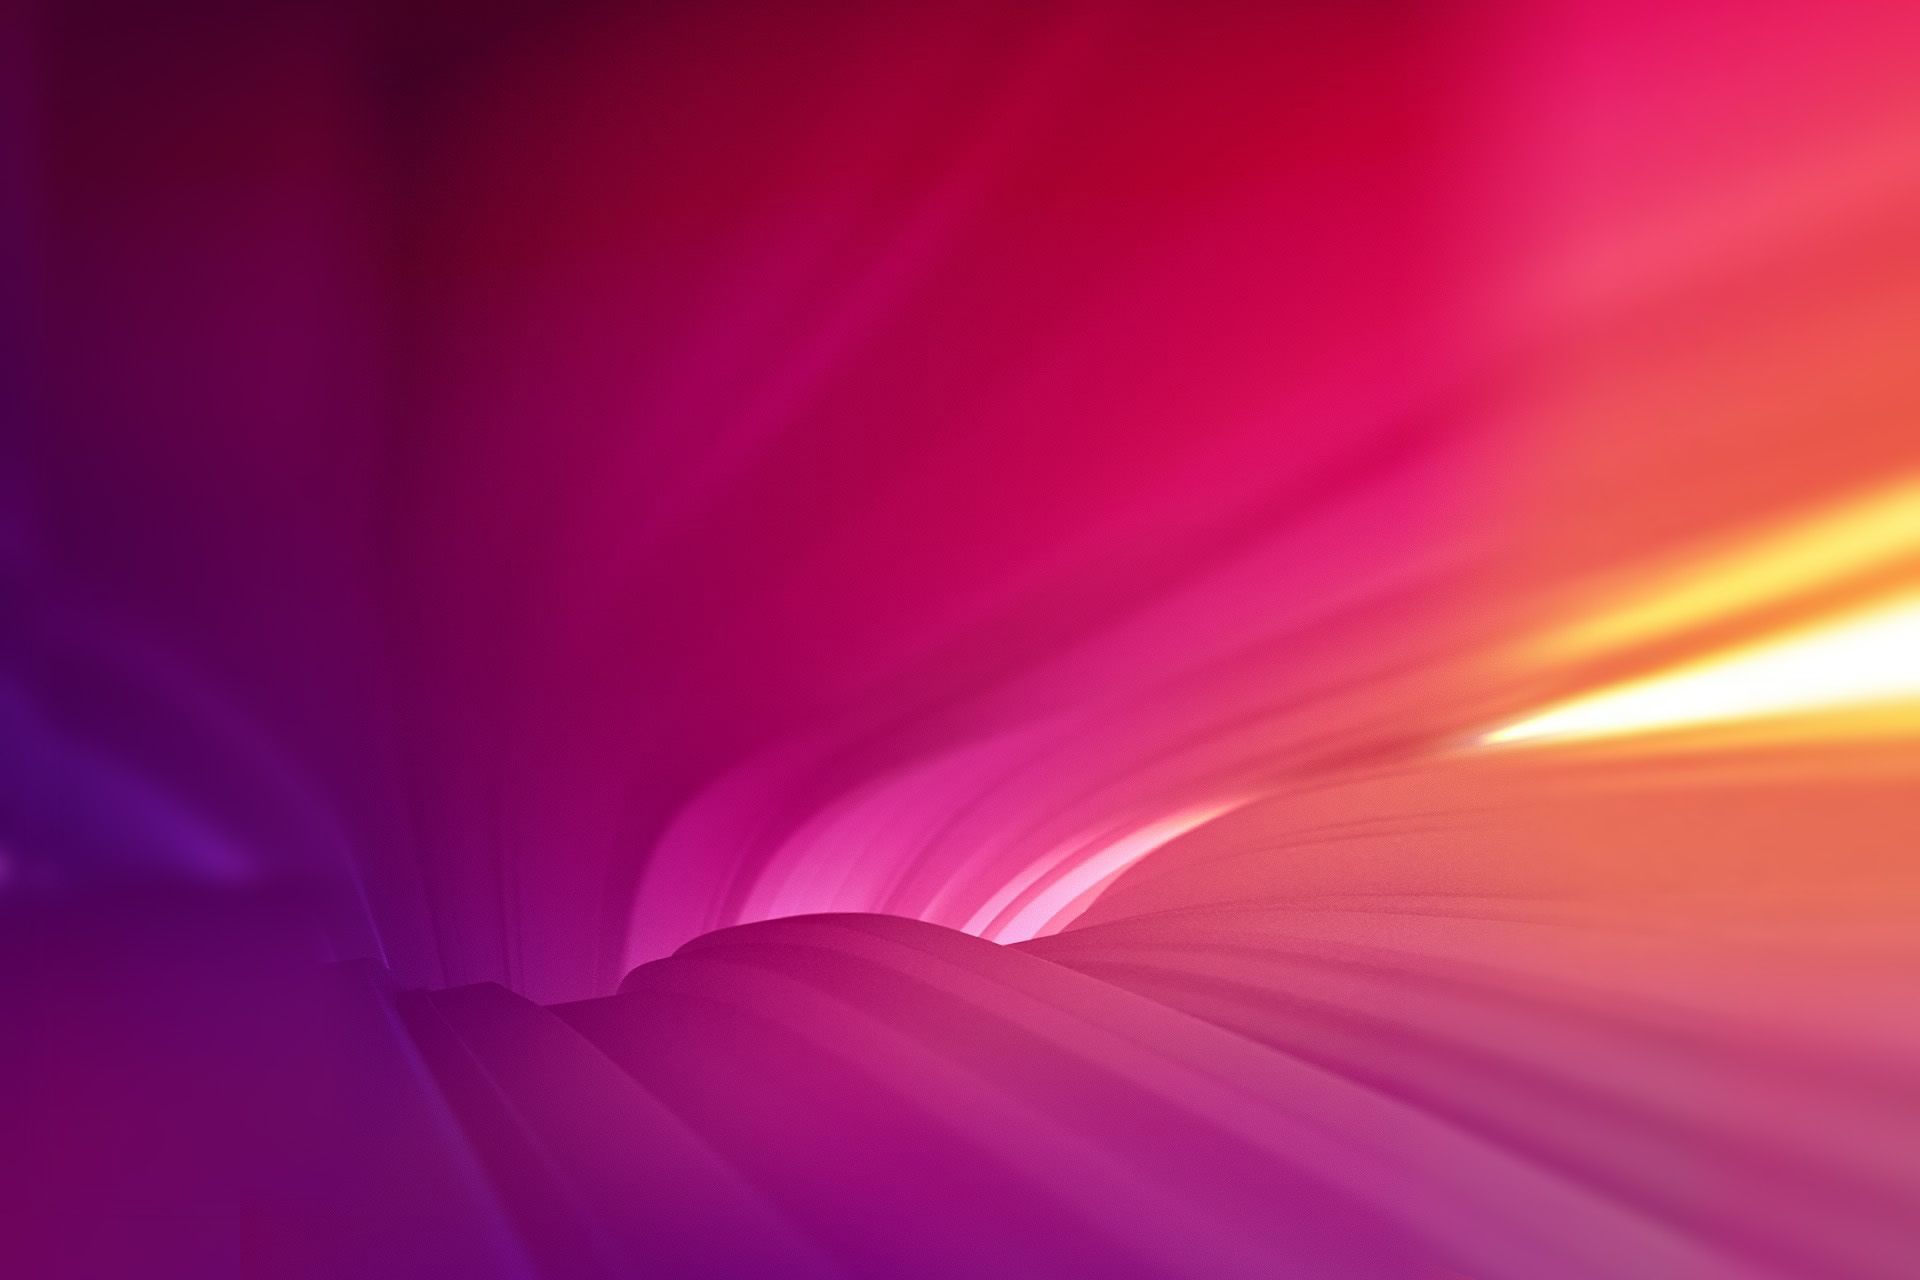 Wallpapers From New Nexus 7 Leak Out And You Can Download Them Here